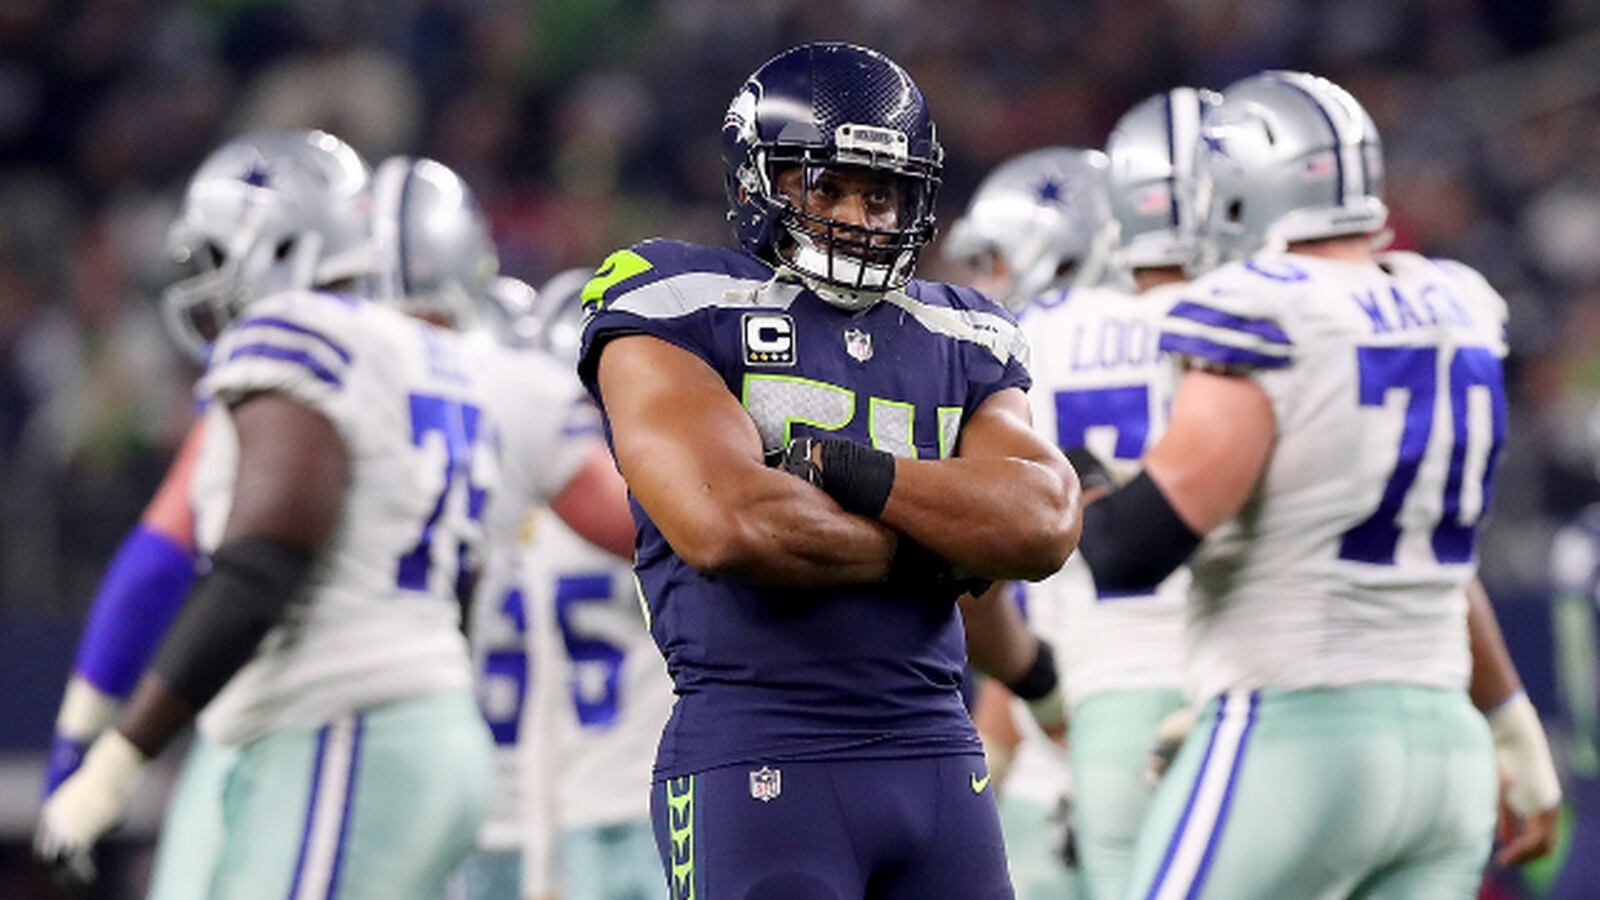 Game Preview: Seahawks look to improve to 3-0 for first time since 2013 with win over Cowboys